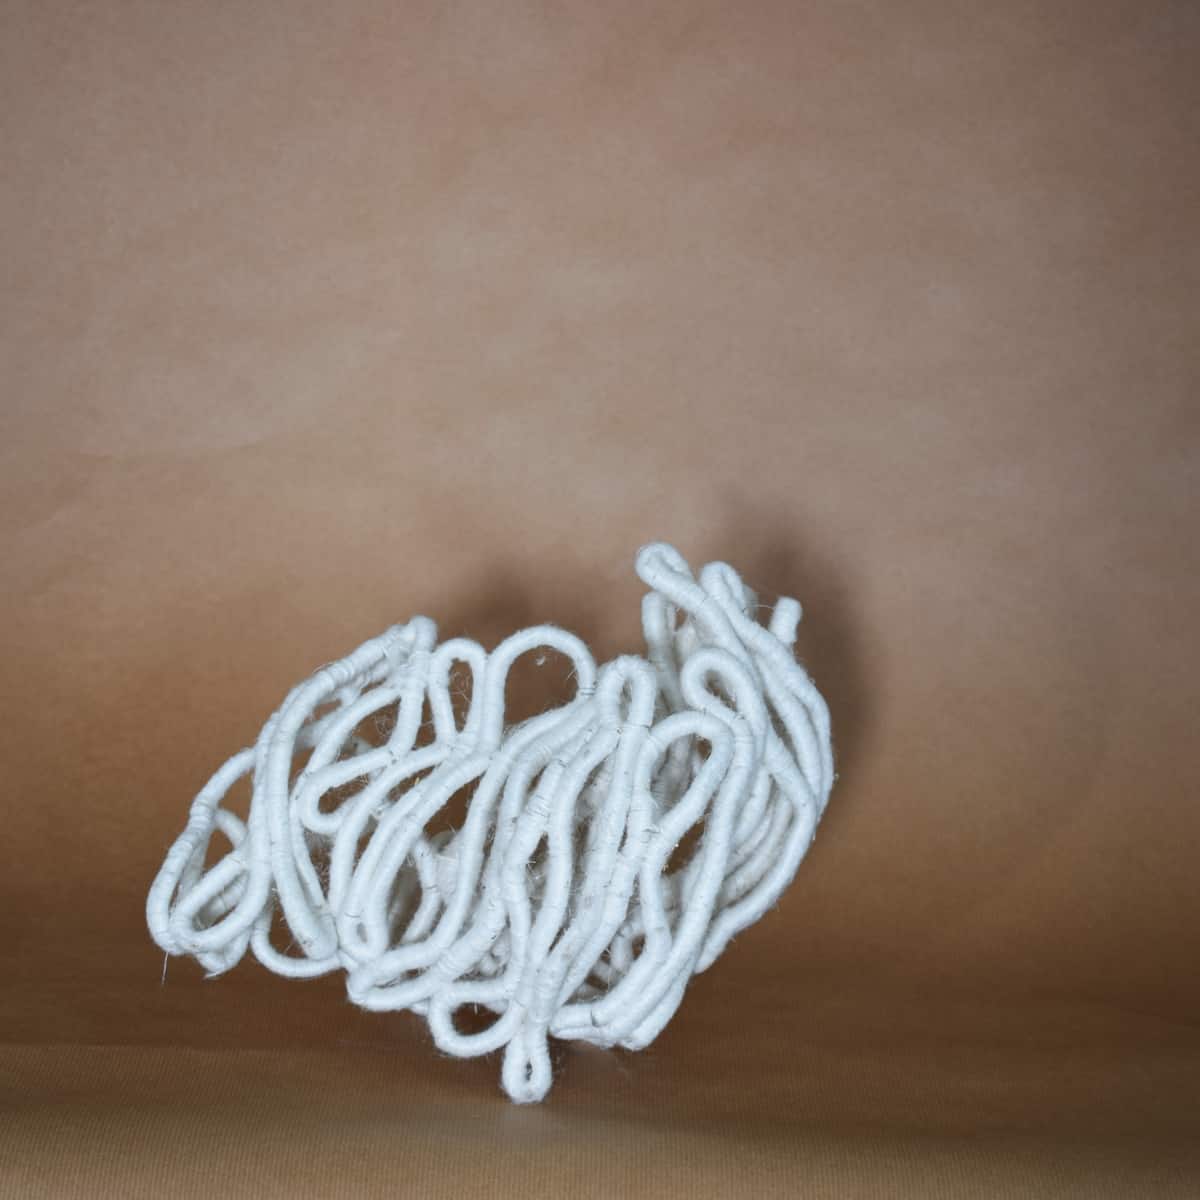 coral-like white sculpture by Aude Franjou